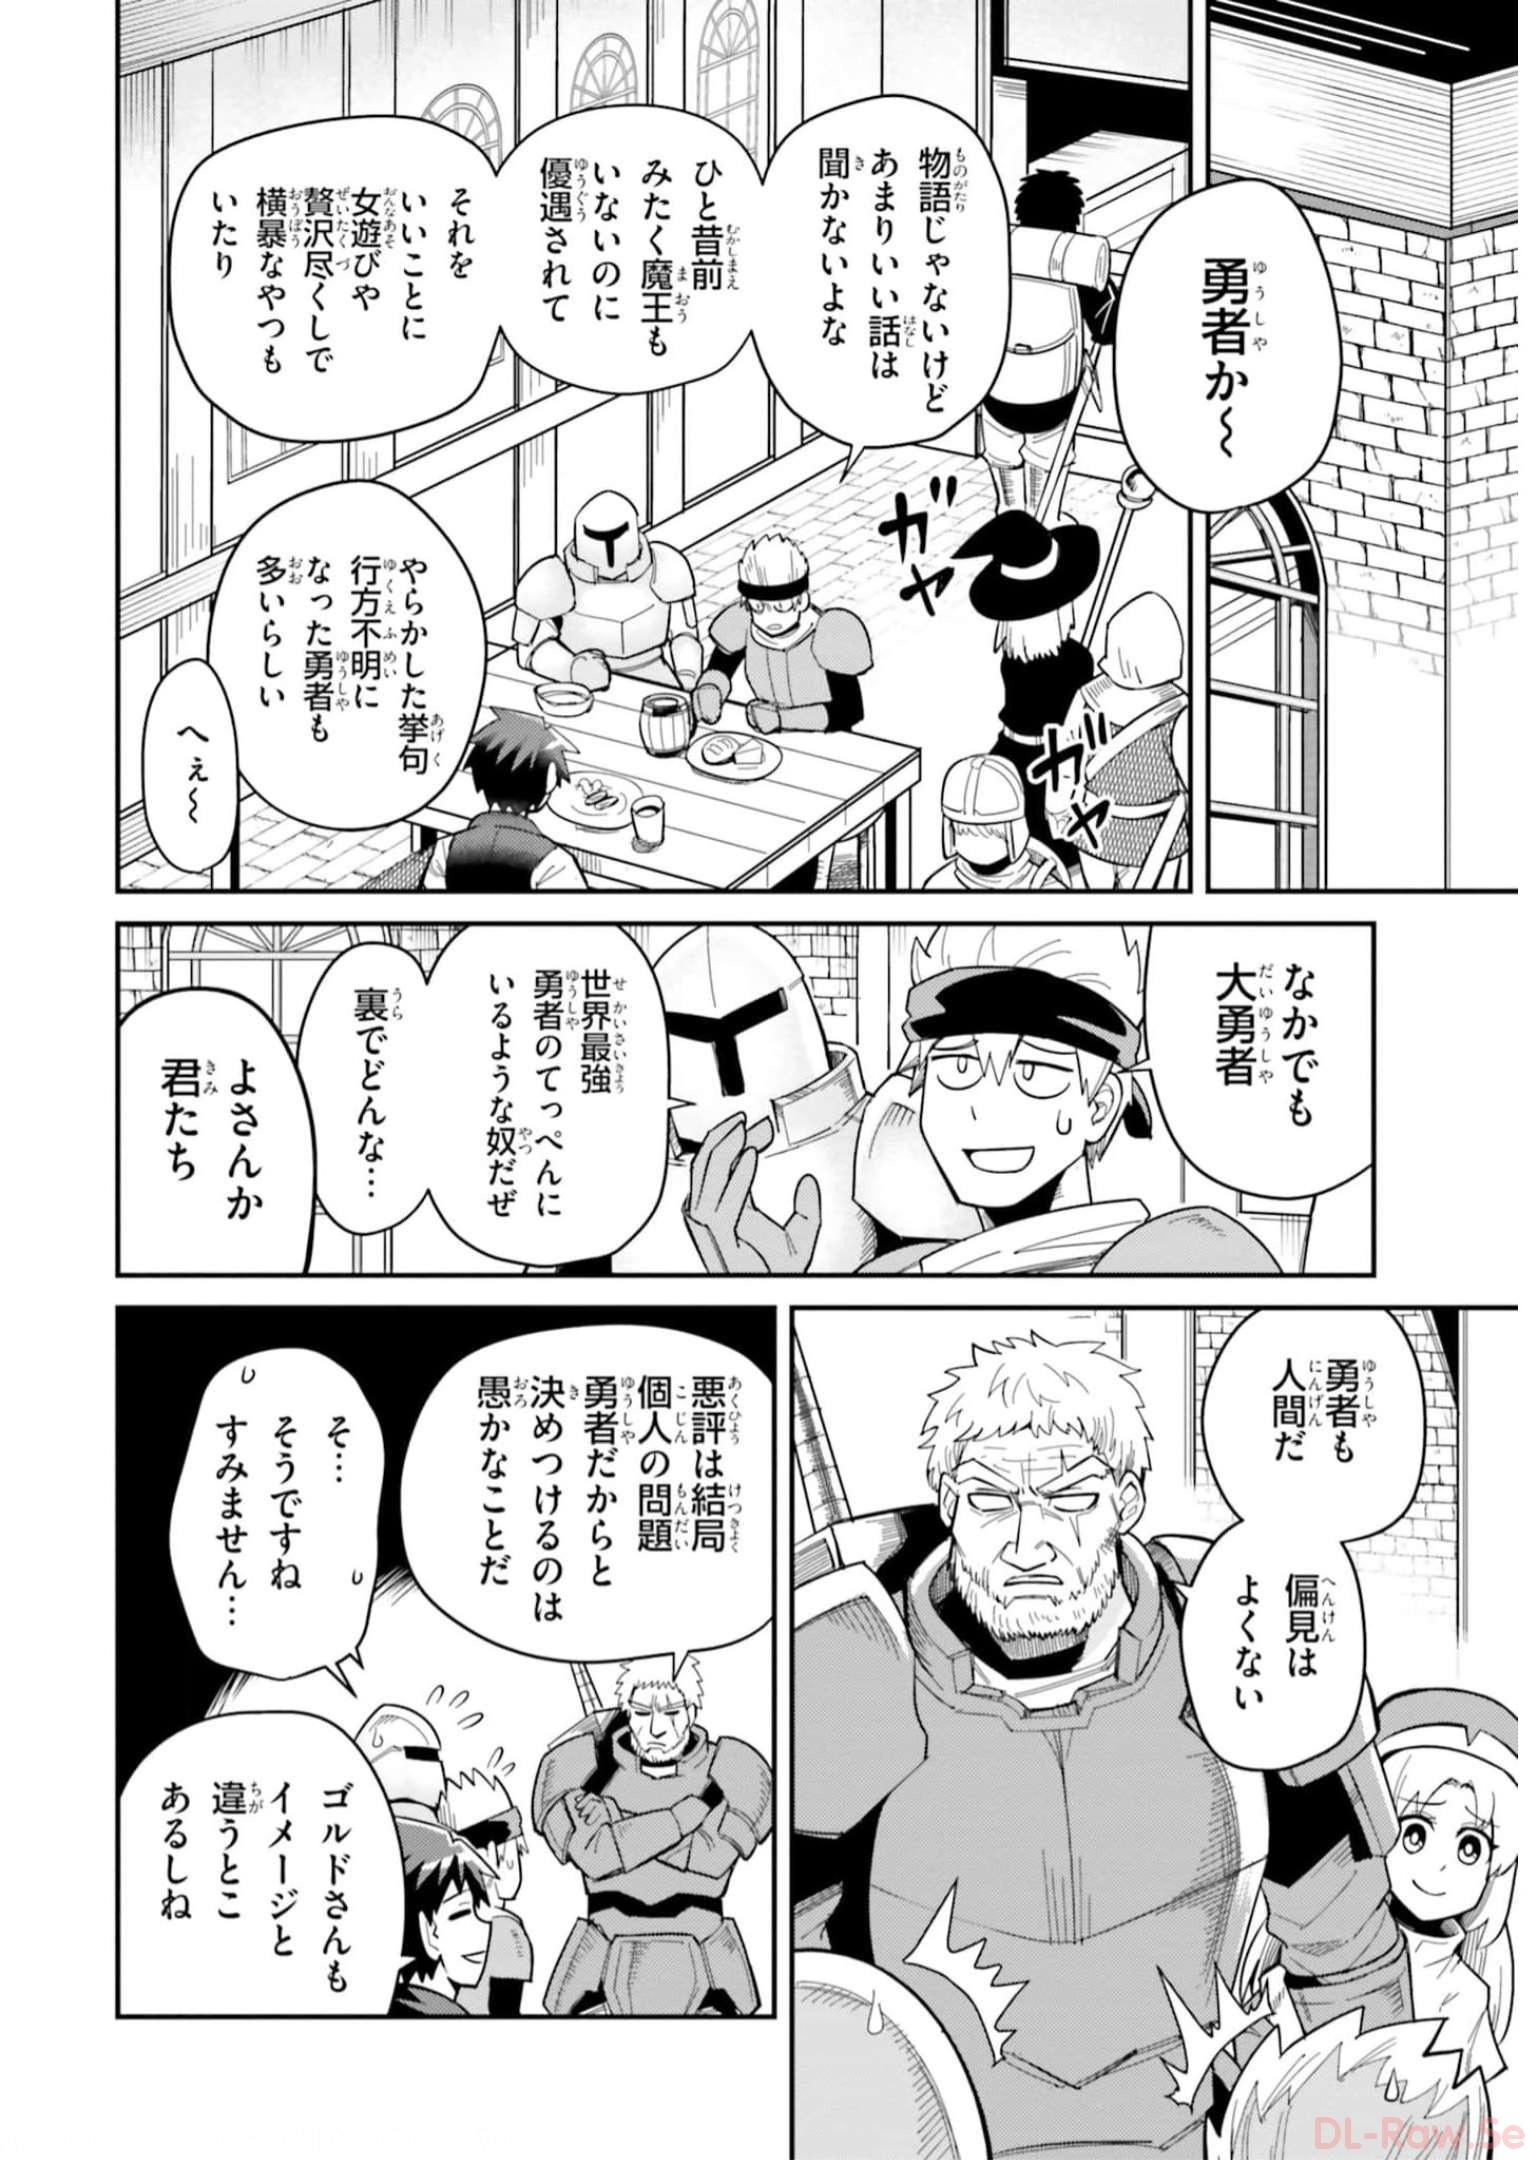 Dungeon Friends Forever Dungeon’s Childhood Friend ダンジョンの幼なじみ 第27話 - Page 3